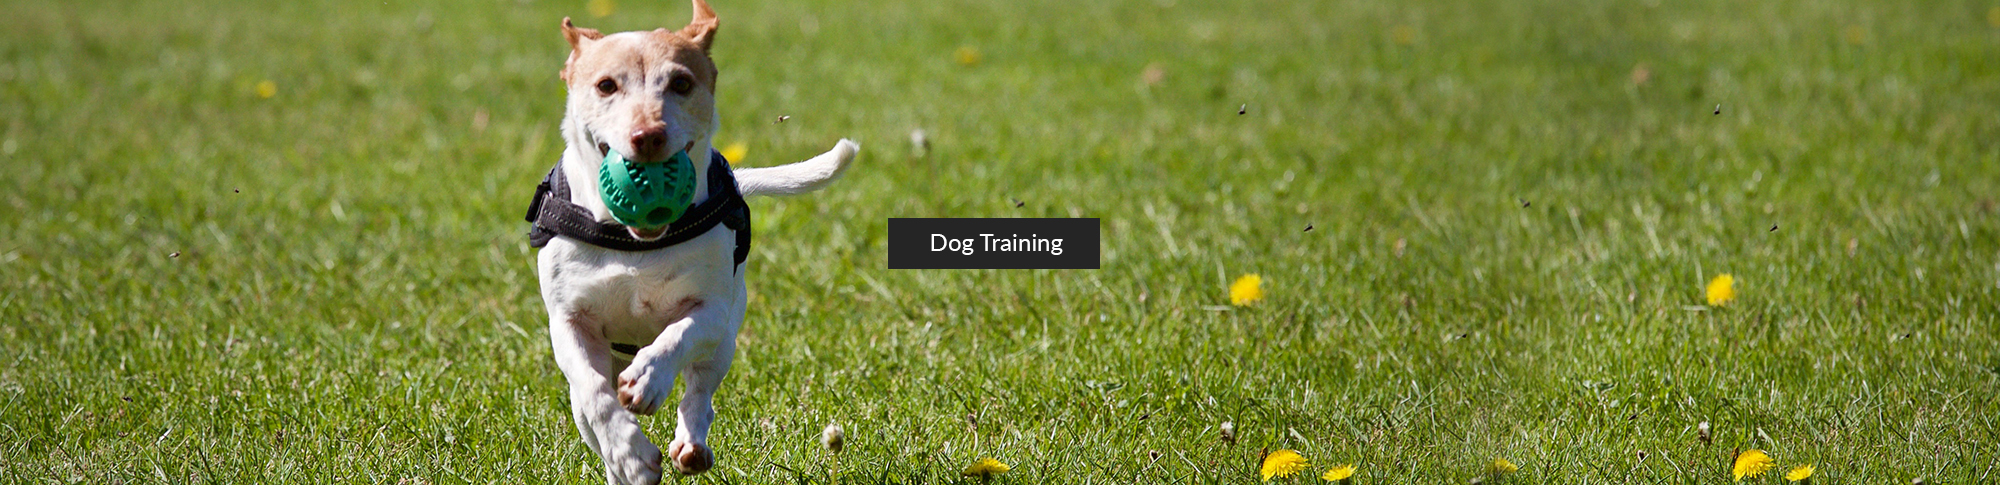 Dog Training - Sit n' Stay Pet Services